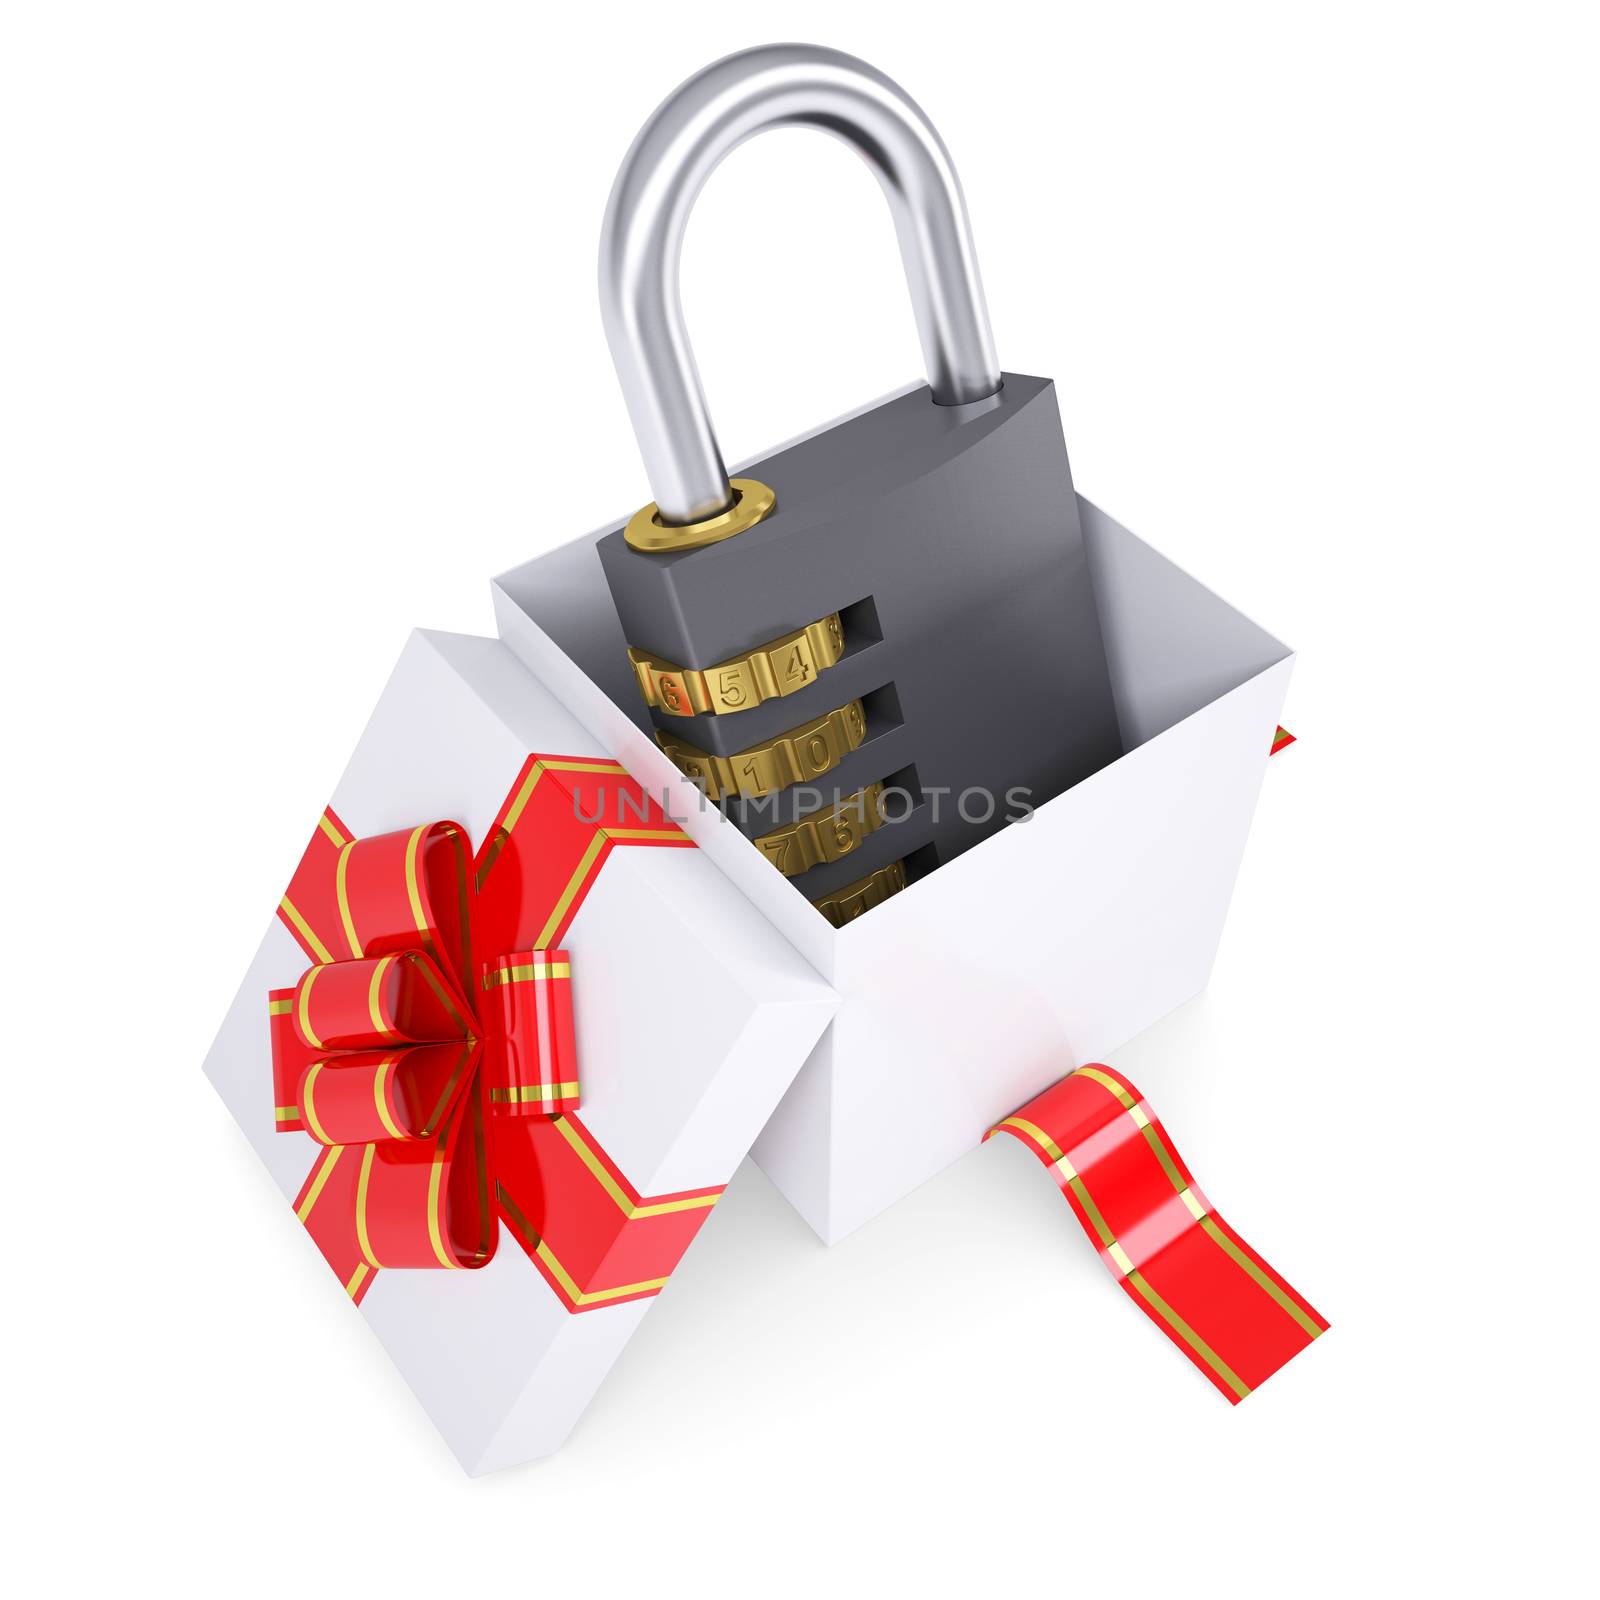 Combination lock in a gift box by cherezoff